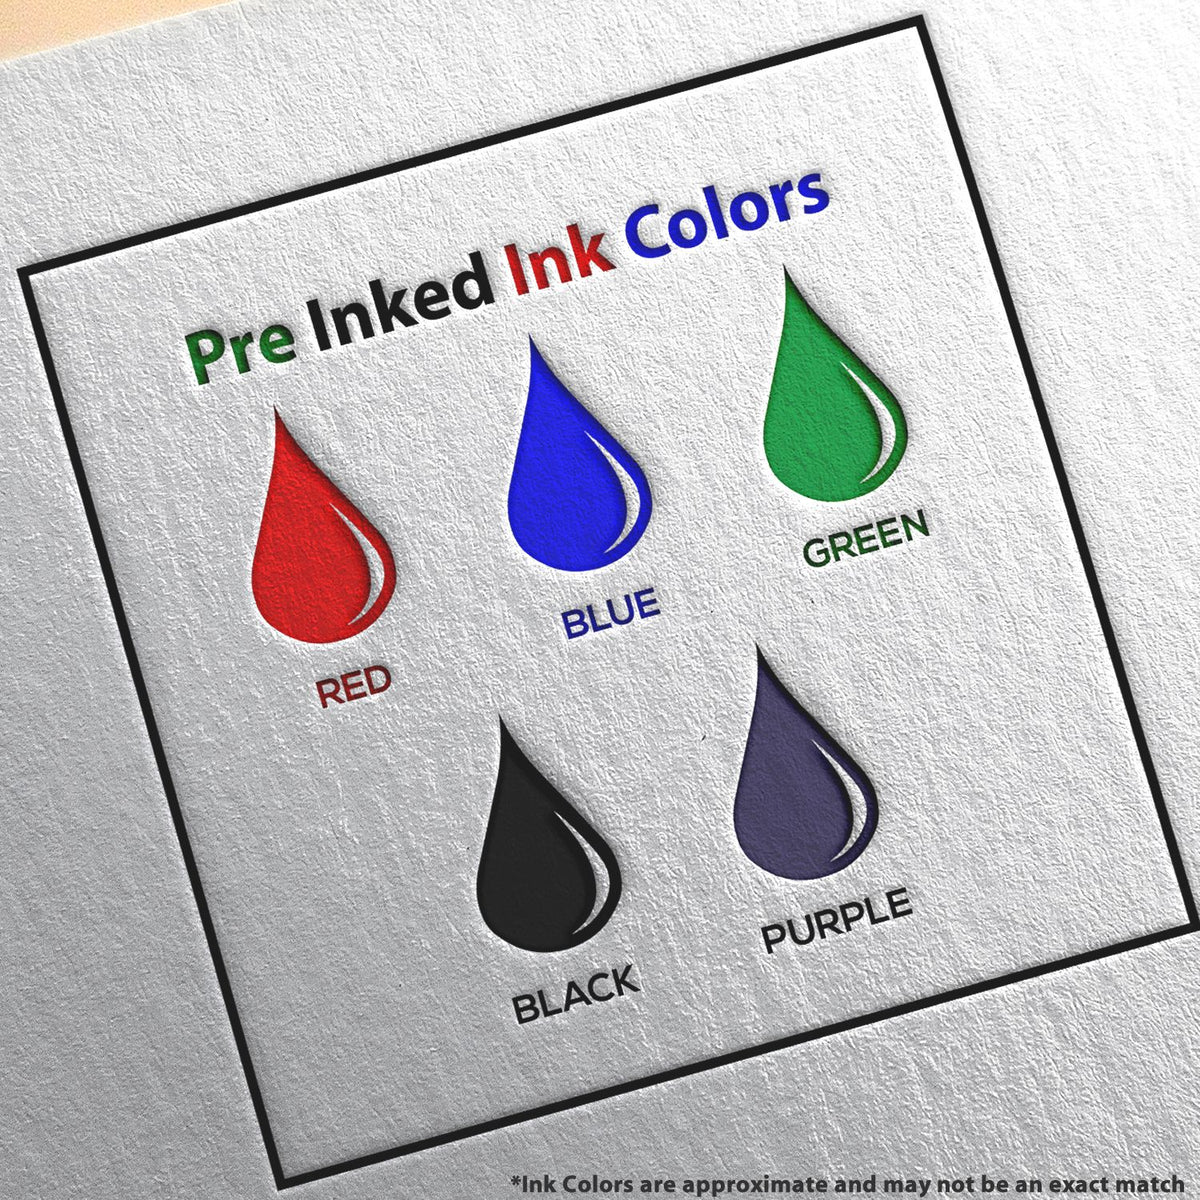 A picture showing the different ink colors or hues available for the Slim Pre-Inked Illinois Professional Geologist Seal Stamp